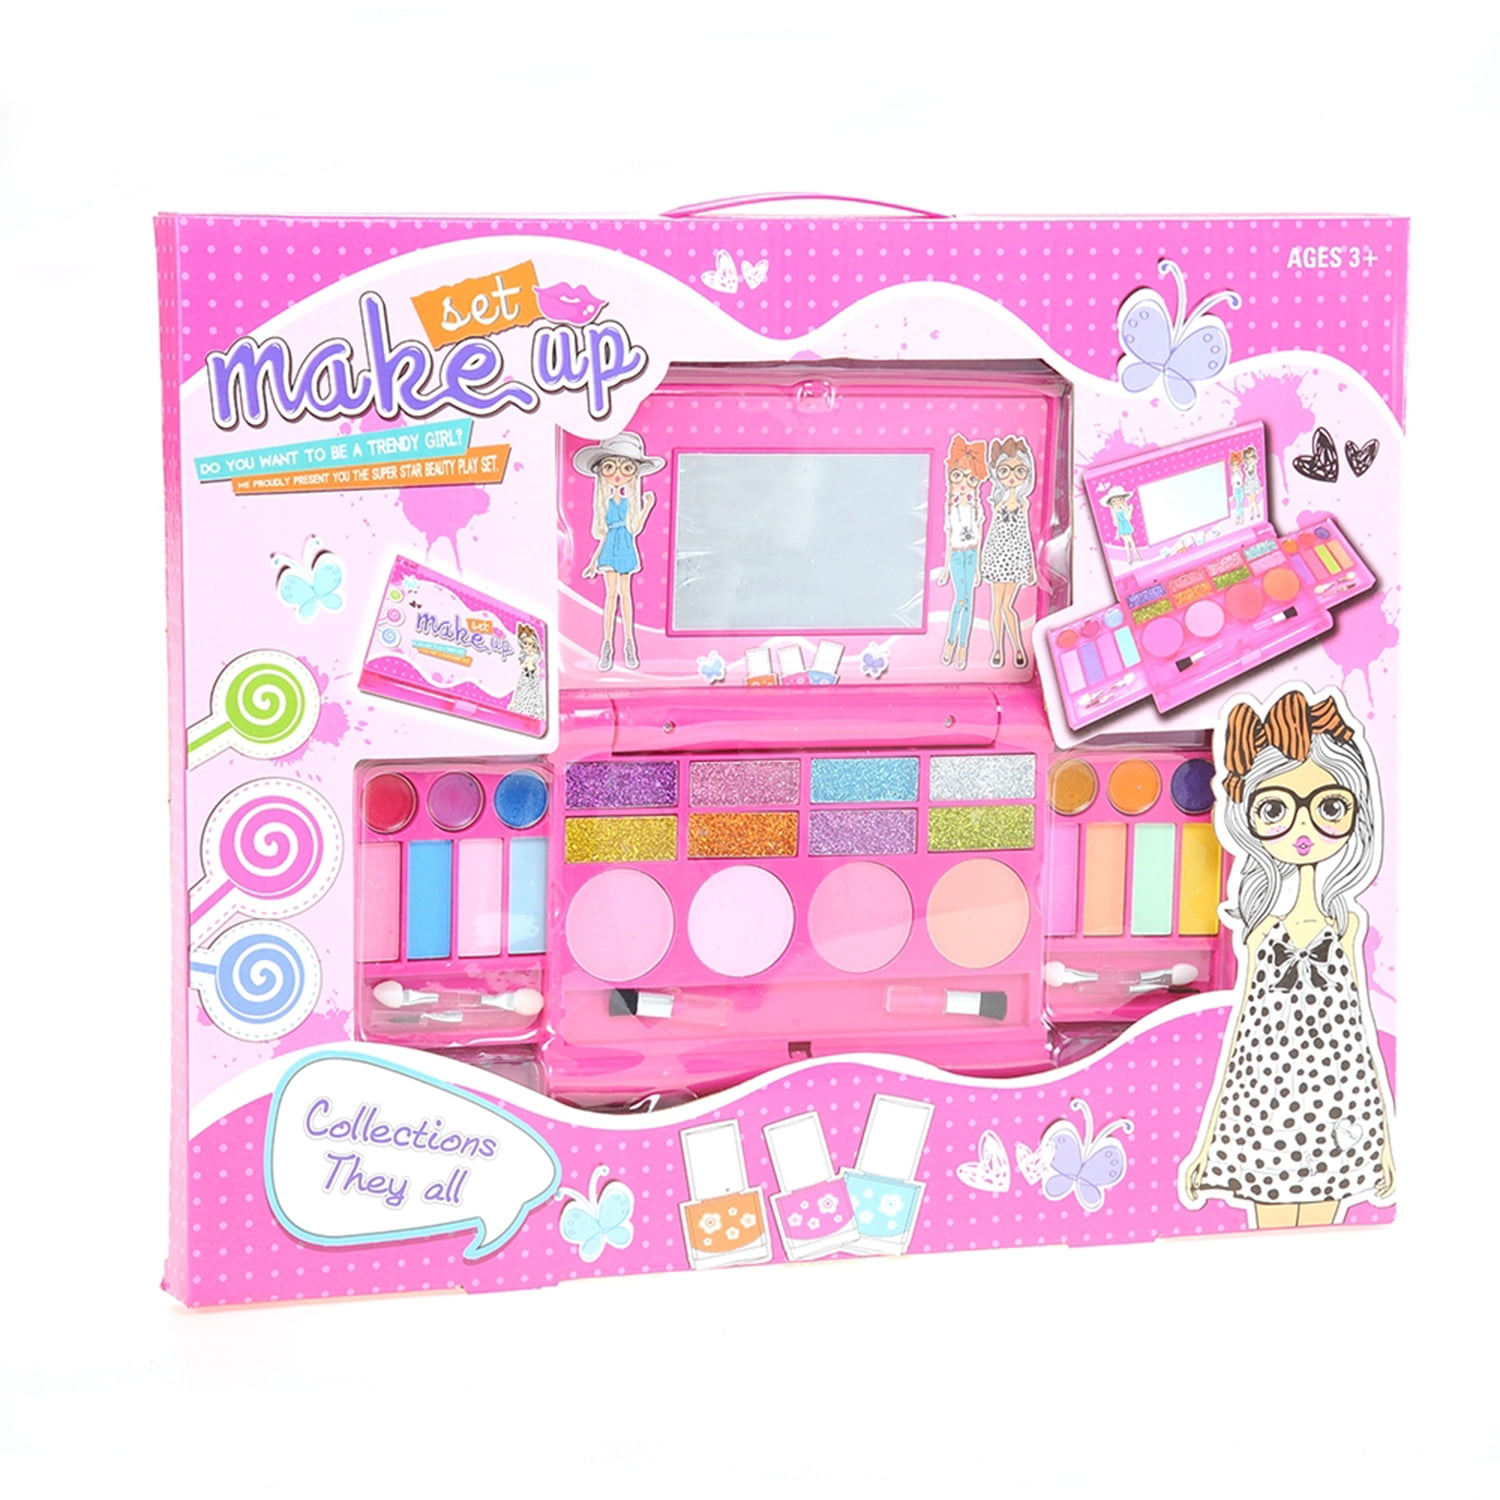 Kids Make Up Toy Set Princess Girls Cosmetics Play Set Palette Vanity With  Mirror Washable And Non Toxic Makeup - Beauty & Fashion Toys - AliExpress